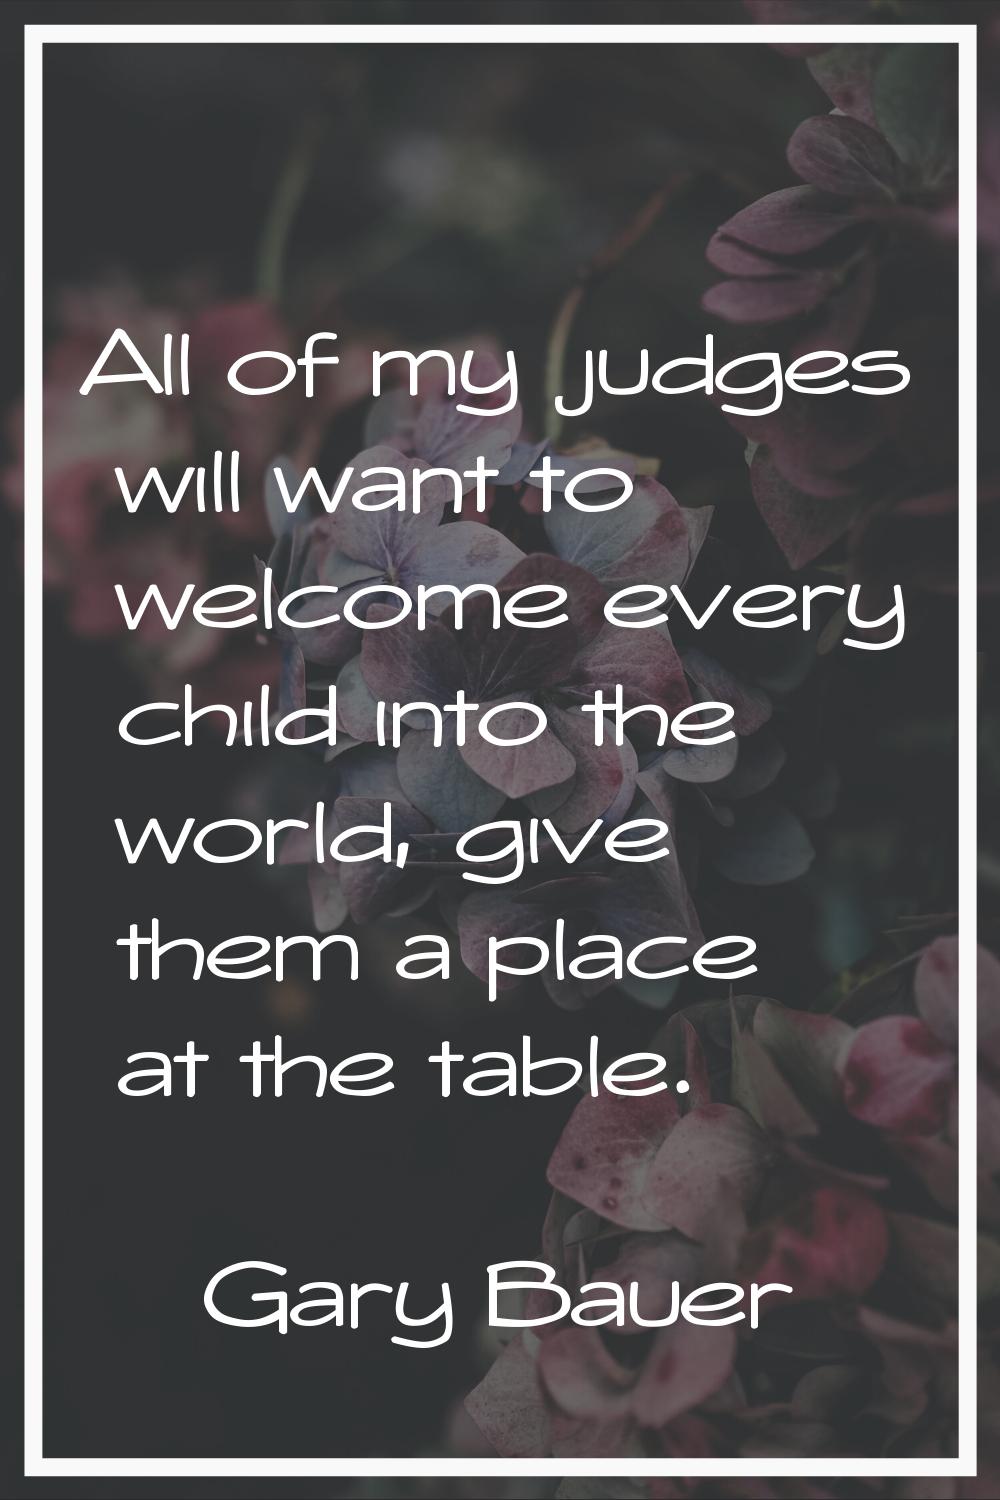 All of my judges will want to welcome every child into the world, give them a place at the table.